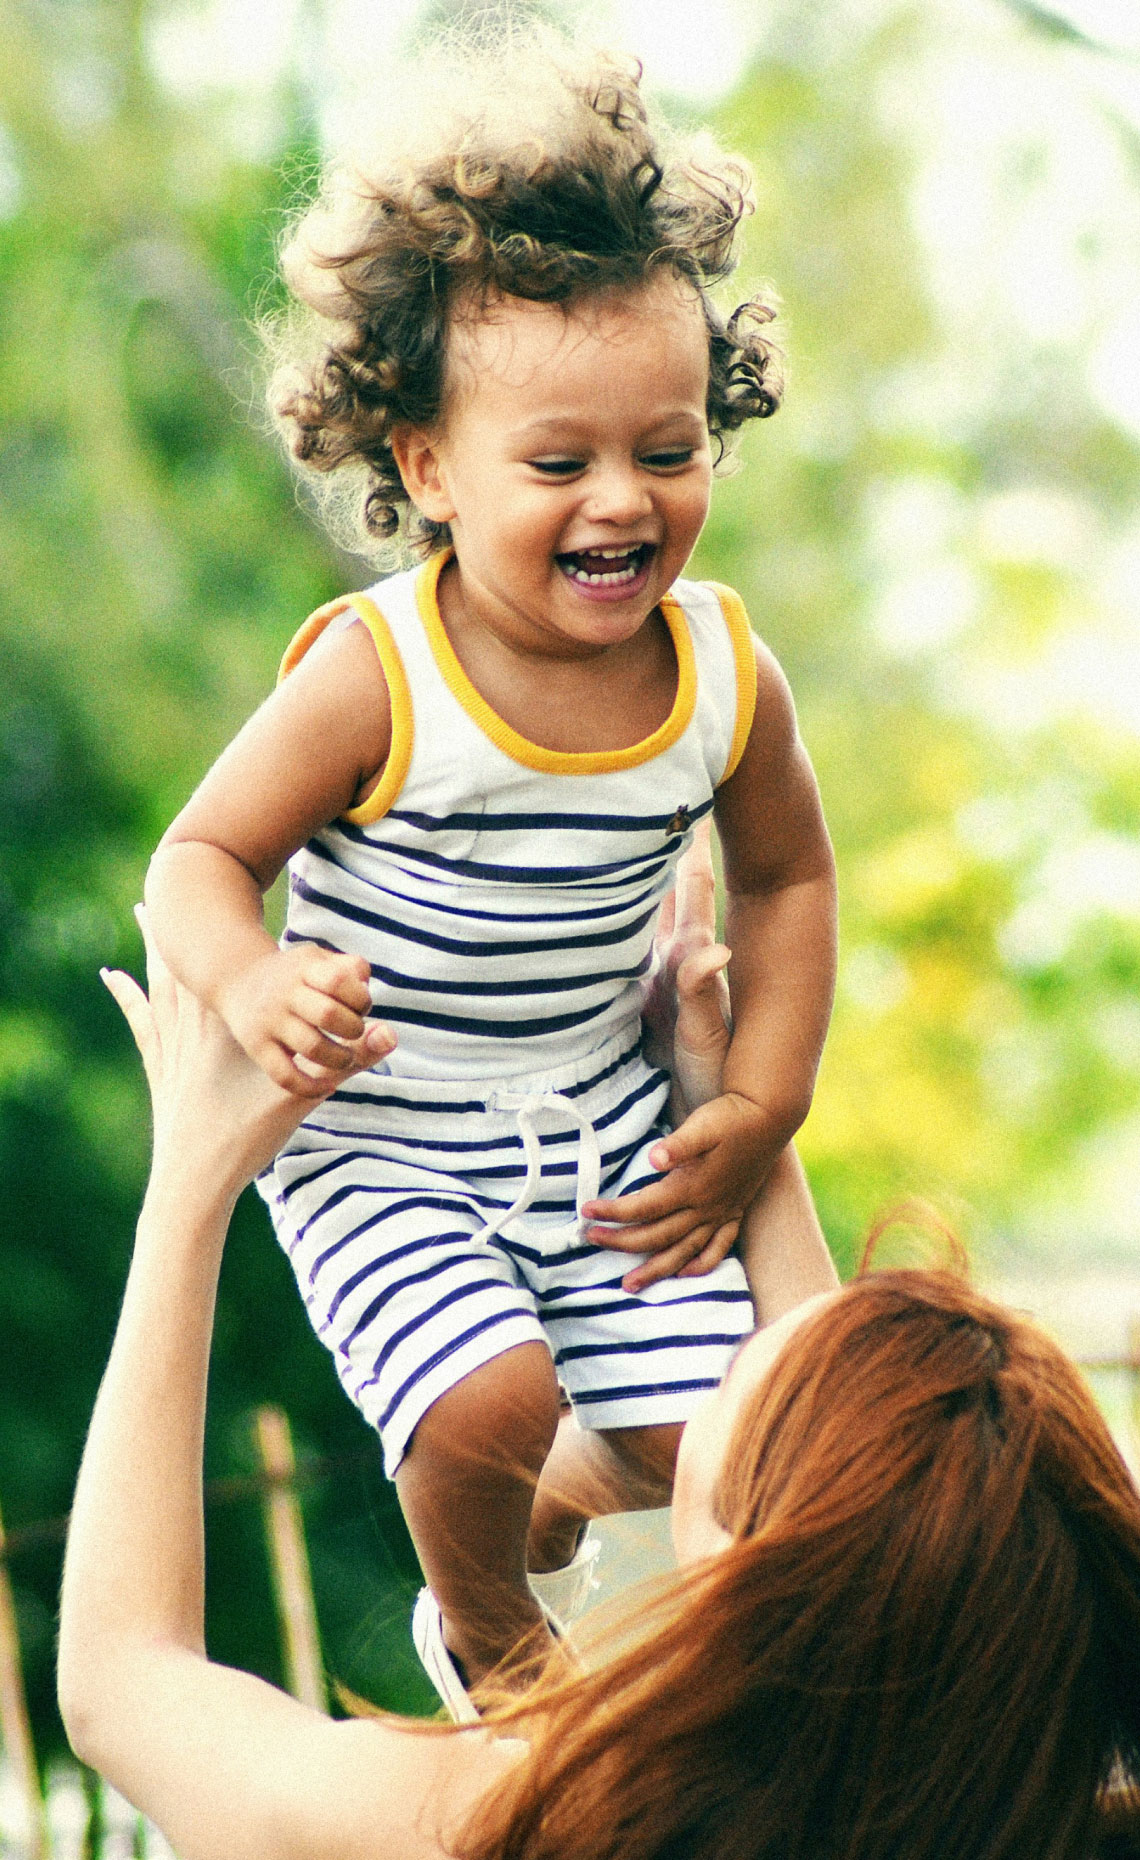 A joyful toddler with curly hair, dressed in a striped outfit, is being lifted high in the air by a woman with red hair, both outdoors surrounded by greenery.